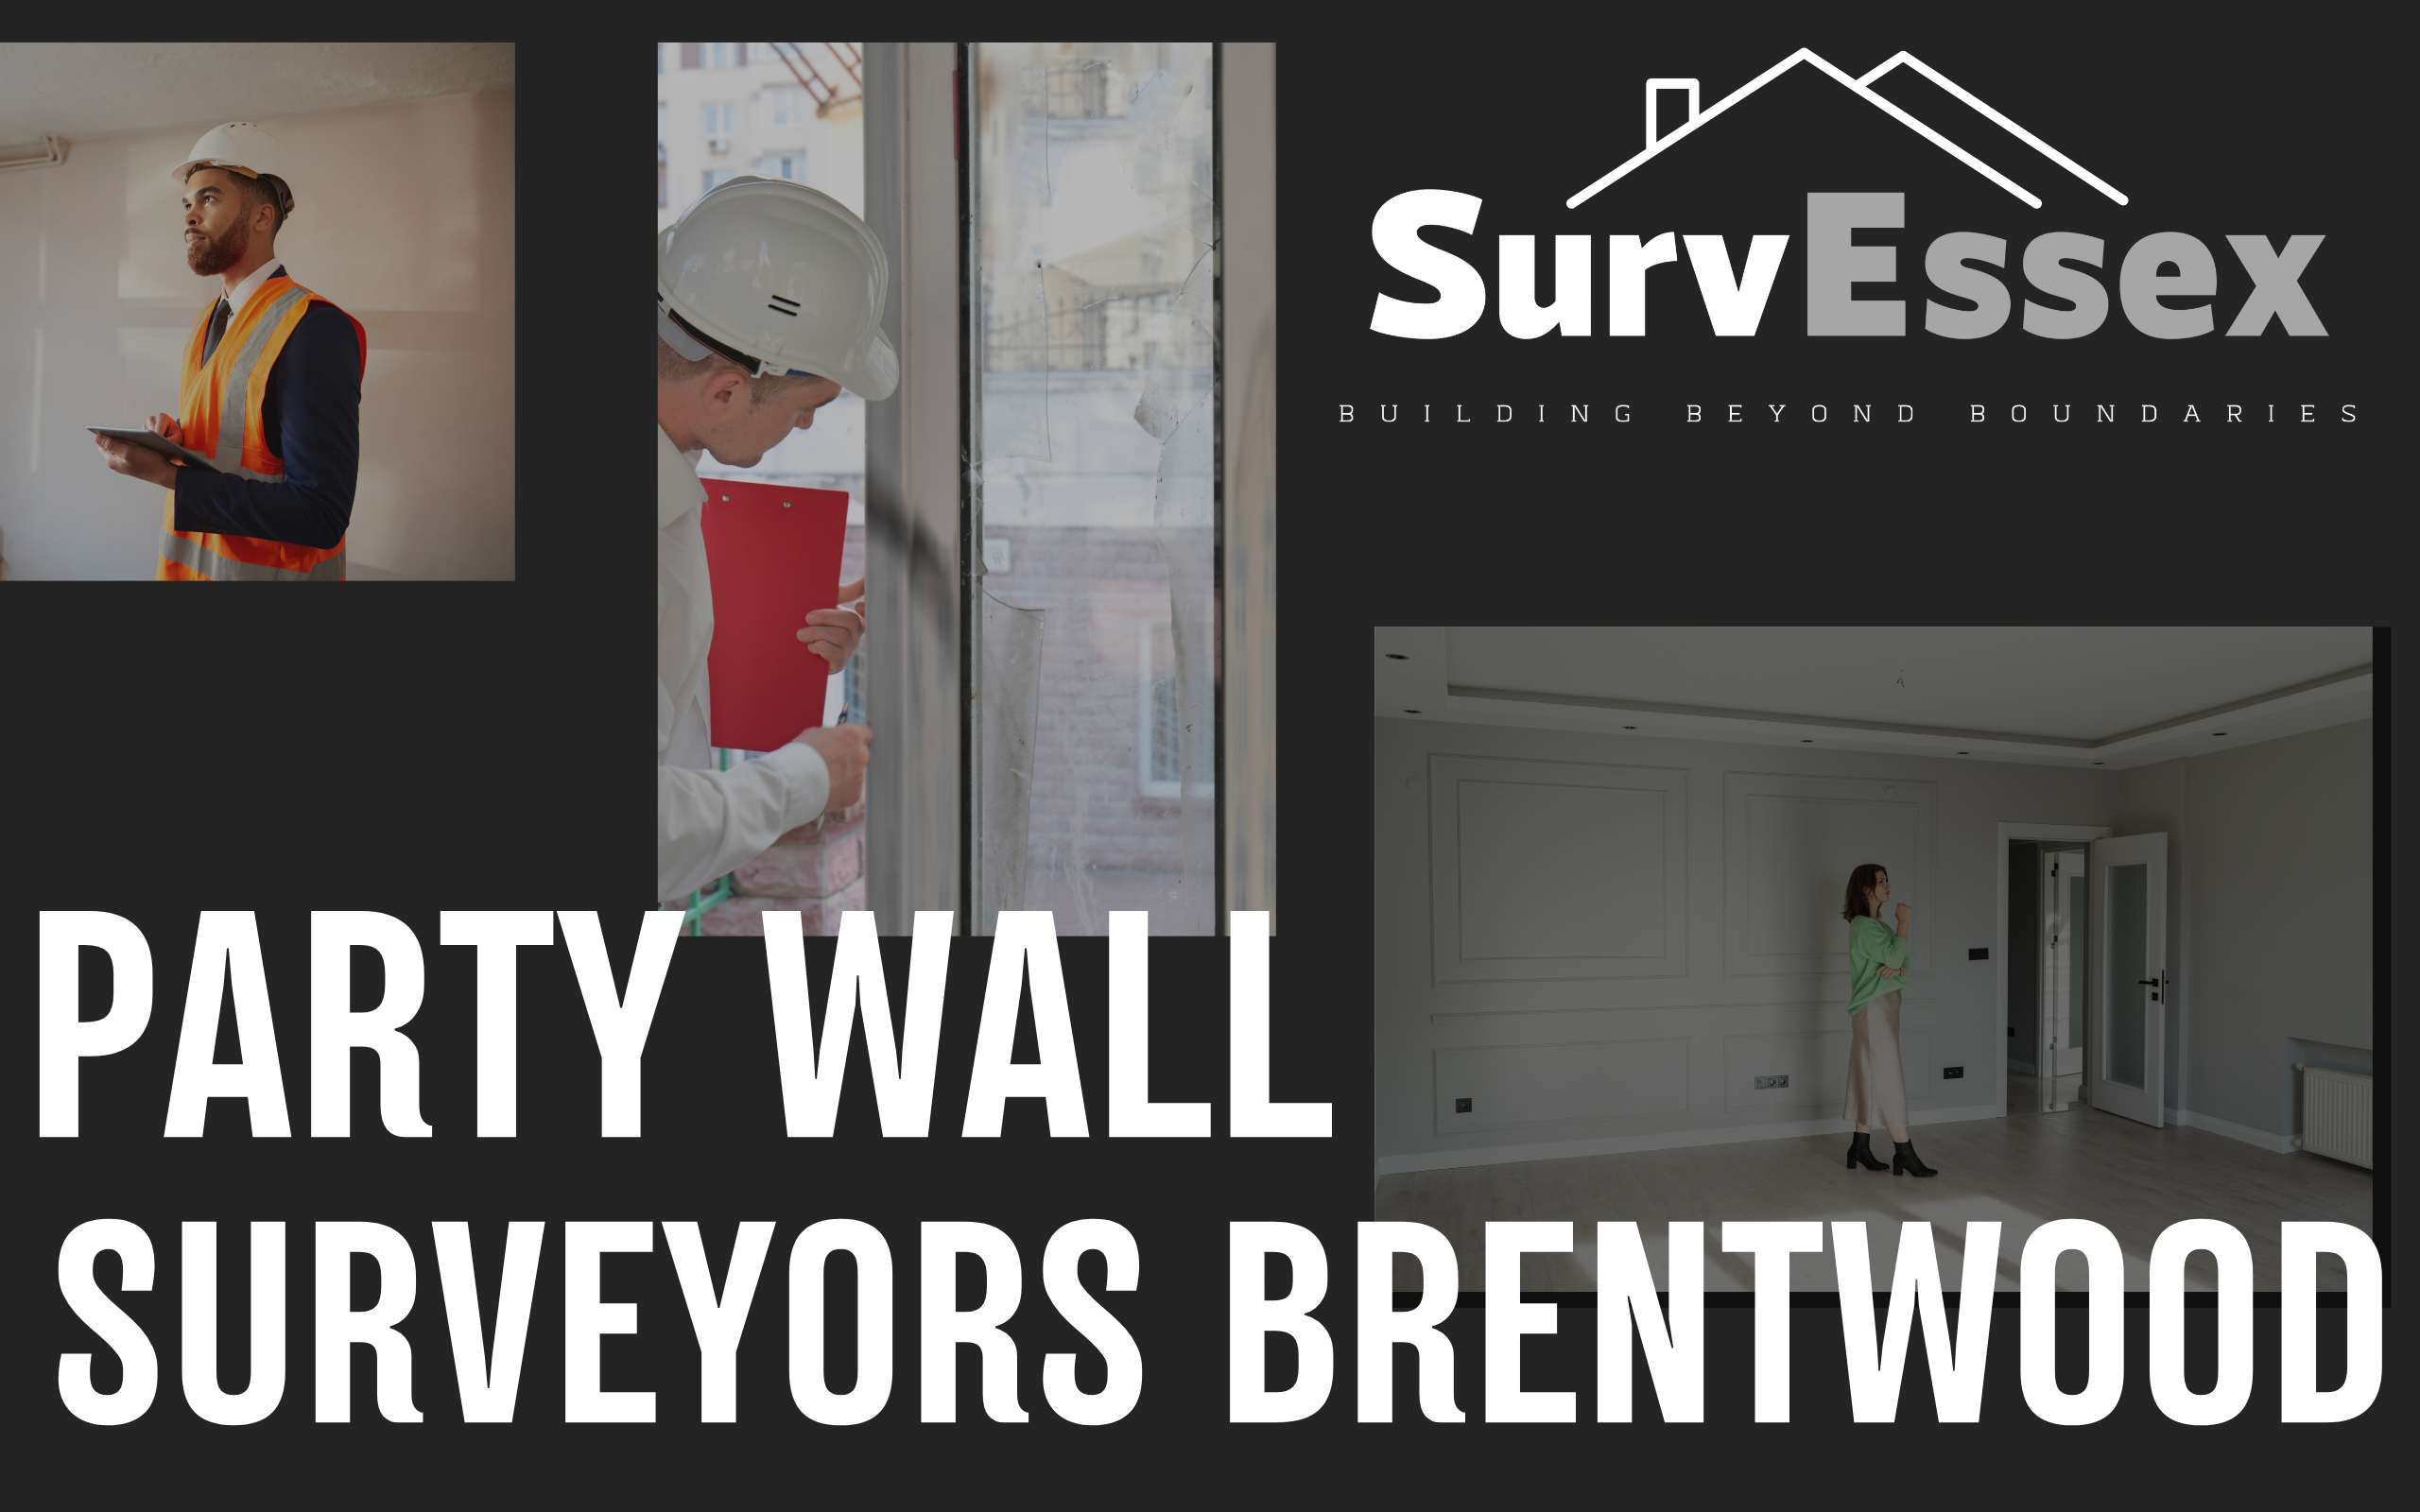 Party Wall Surveyor Brentwood